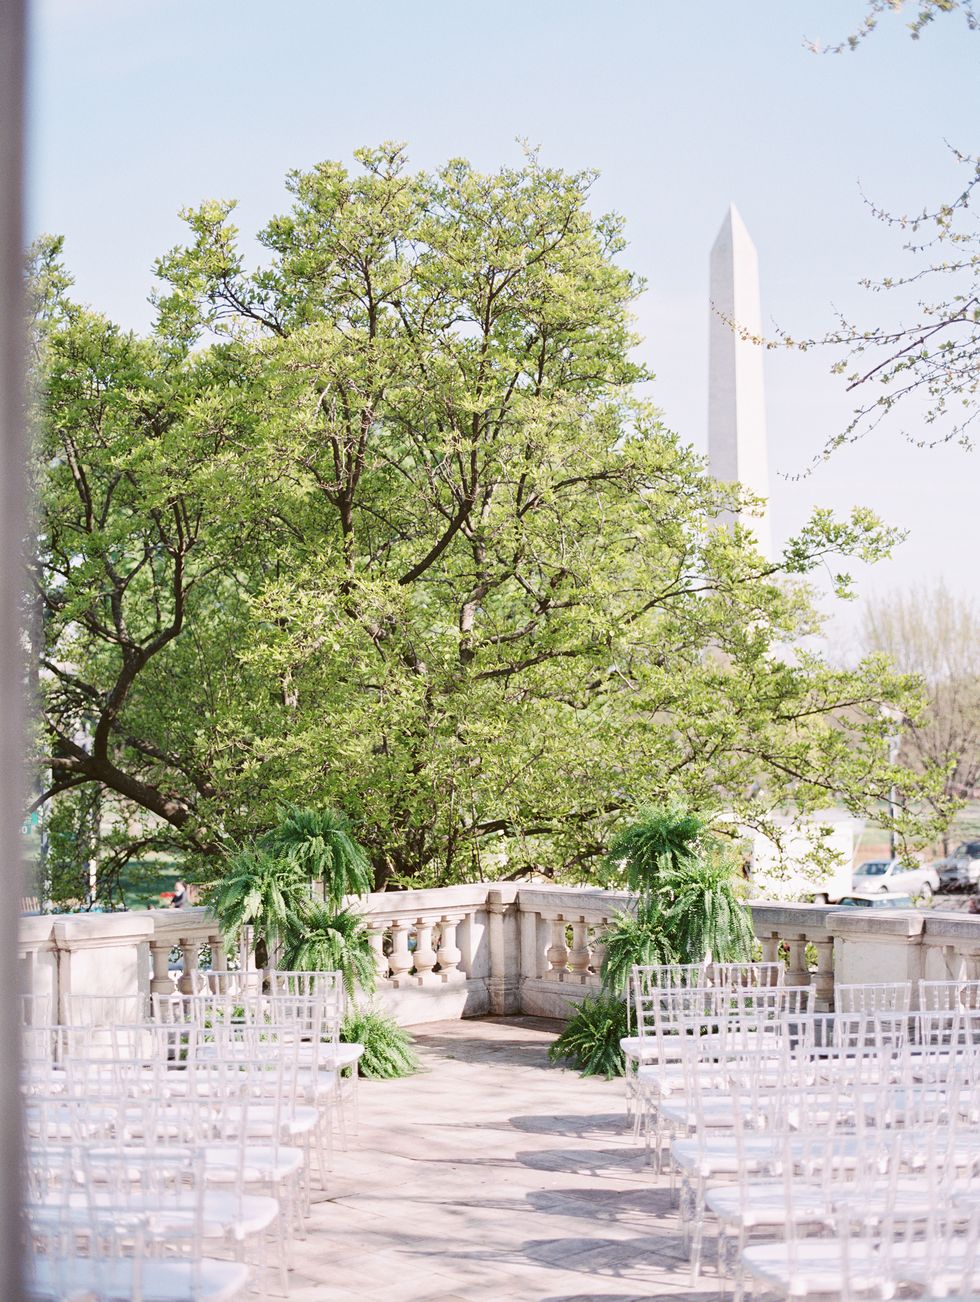 <p>The ceremony took place on the portico of DAR with the Washington Monument in the background and was anchored by a large tree for décor. "After choosing a location like DAR, it was almost like it didn't matter what we put there because it was already so beautiful," says Arielle.</p>